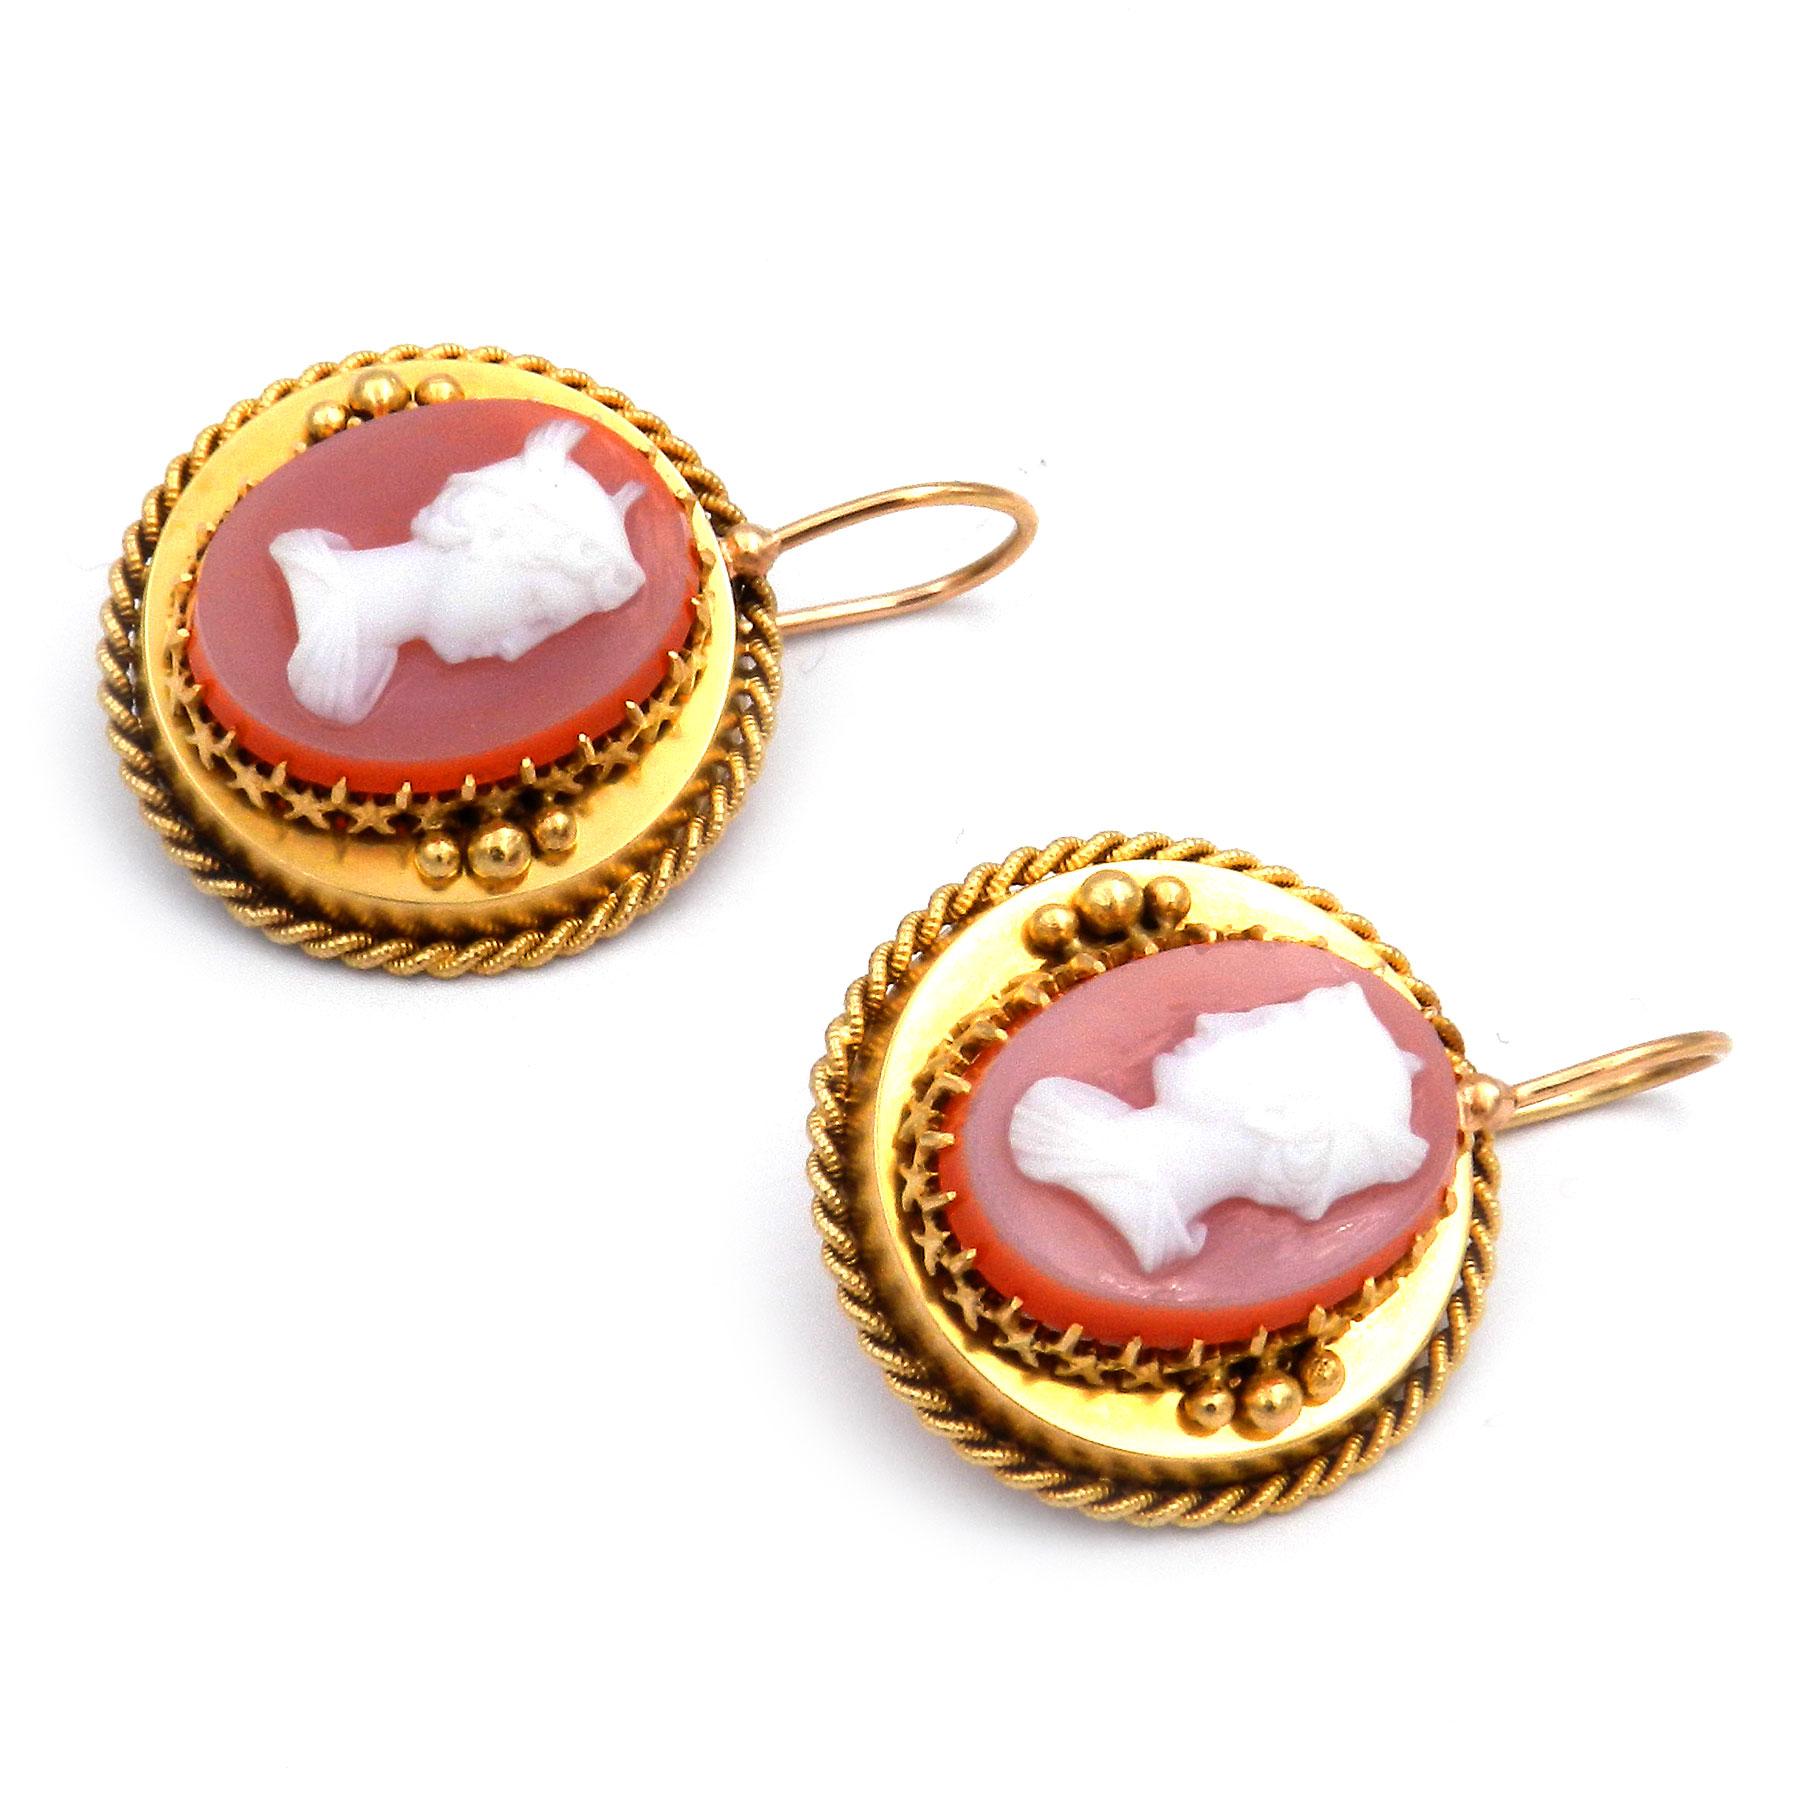 Etruscan Revival Antique Etruscan Style Agate Cameo Gold Earrings circa 1860 For Sale